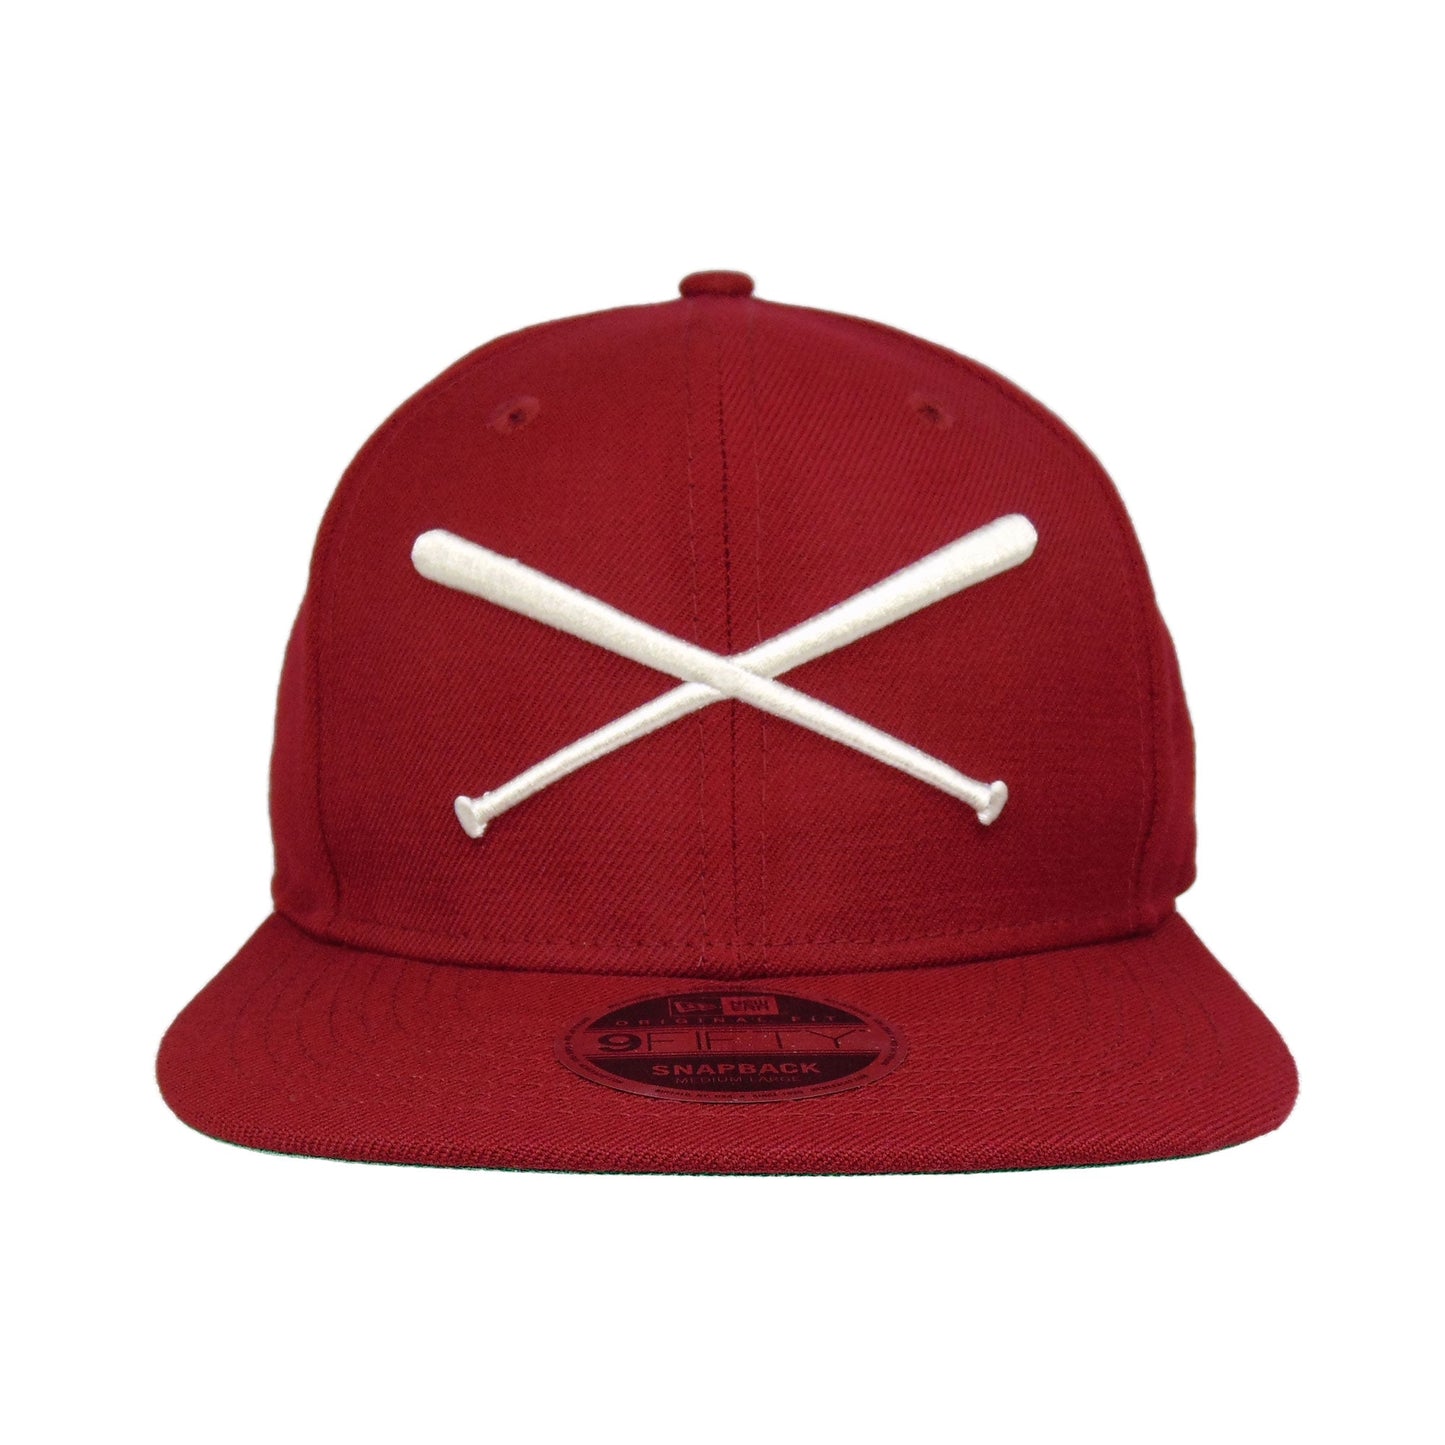 Justfitteds Crossed Bats 9FIFTY New Era Cap Snapback Cardinal Red